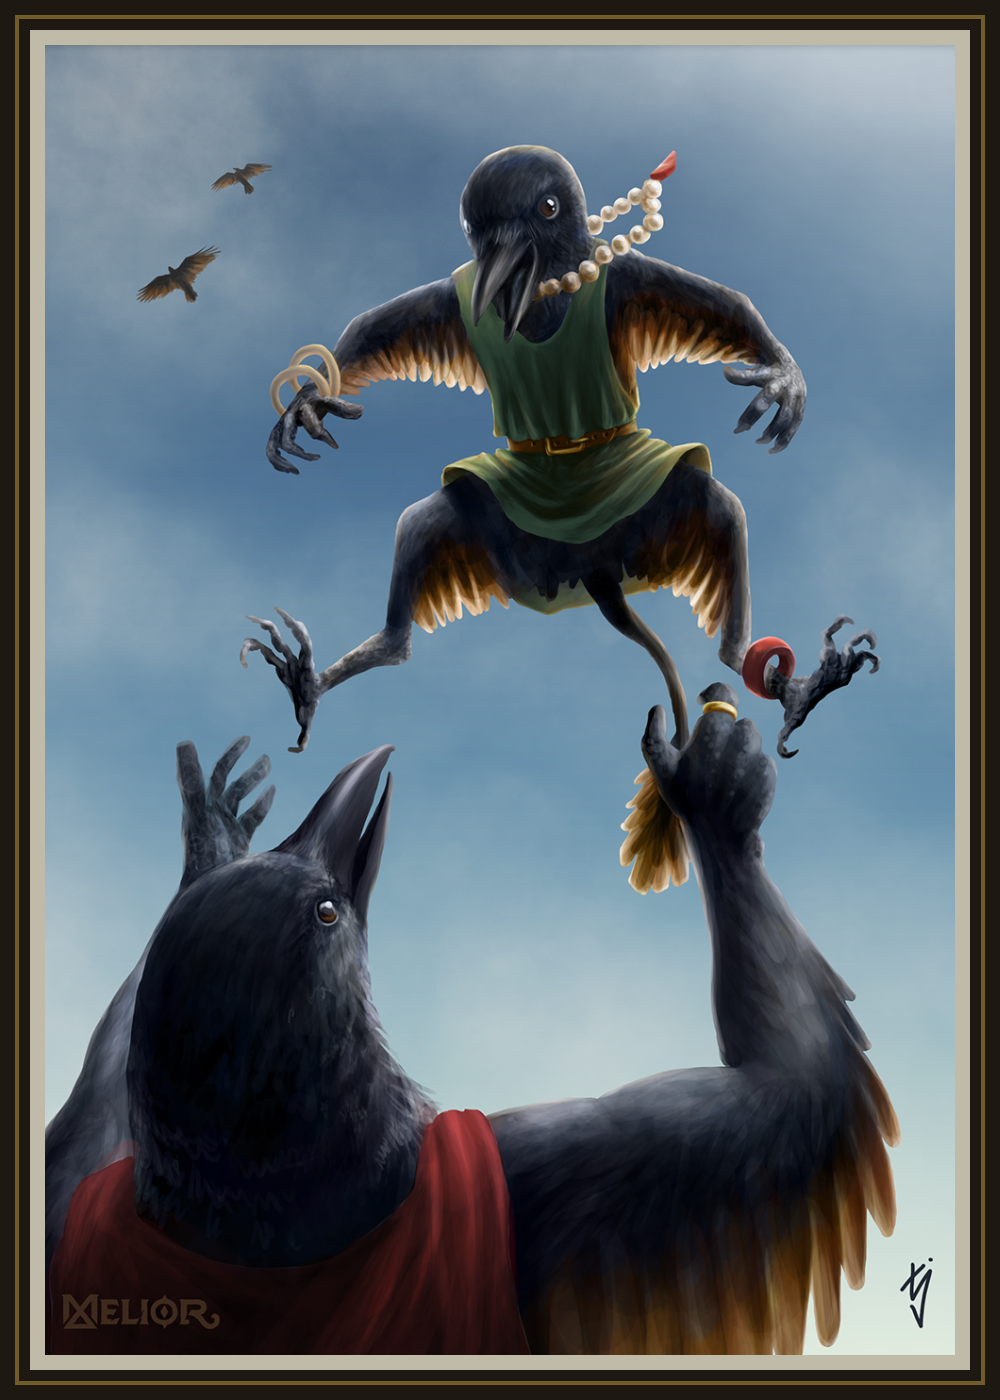 A corvidan parent playfully launches their young child into the sky, where they gleefully daydream of being able to fly like the birds high in the sky above them.